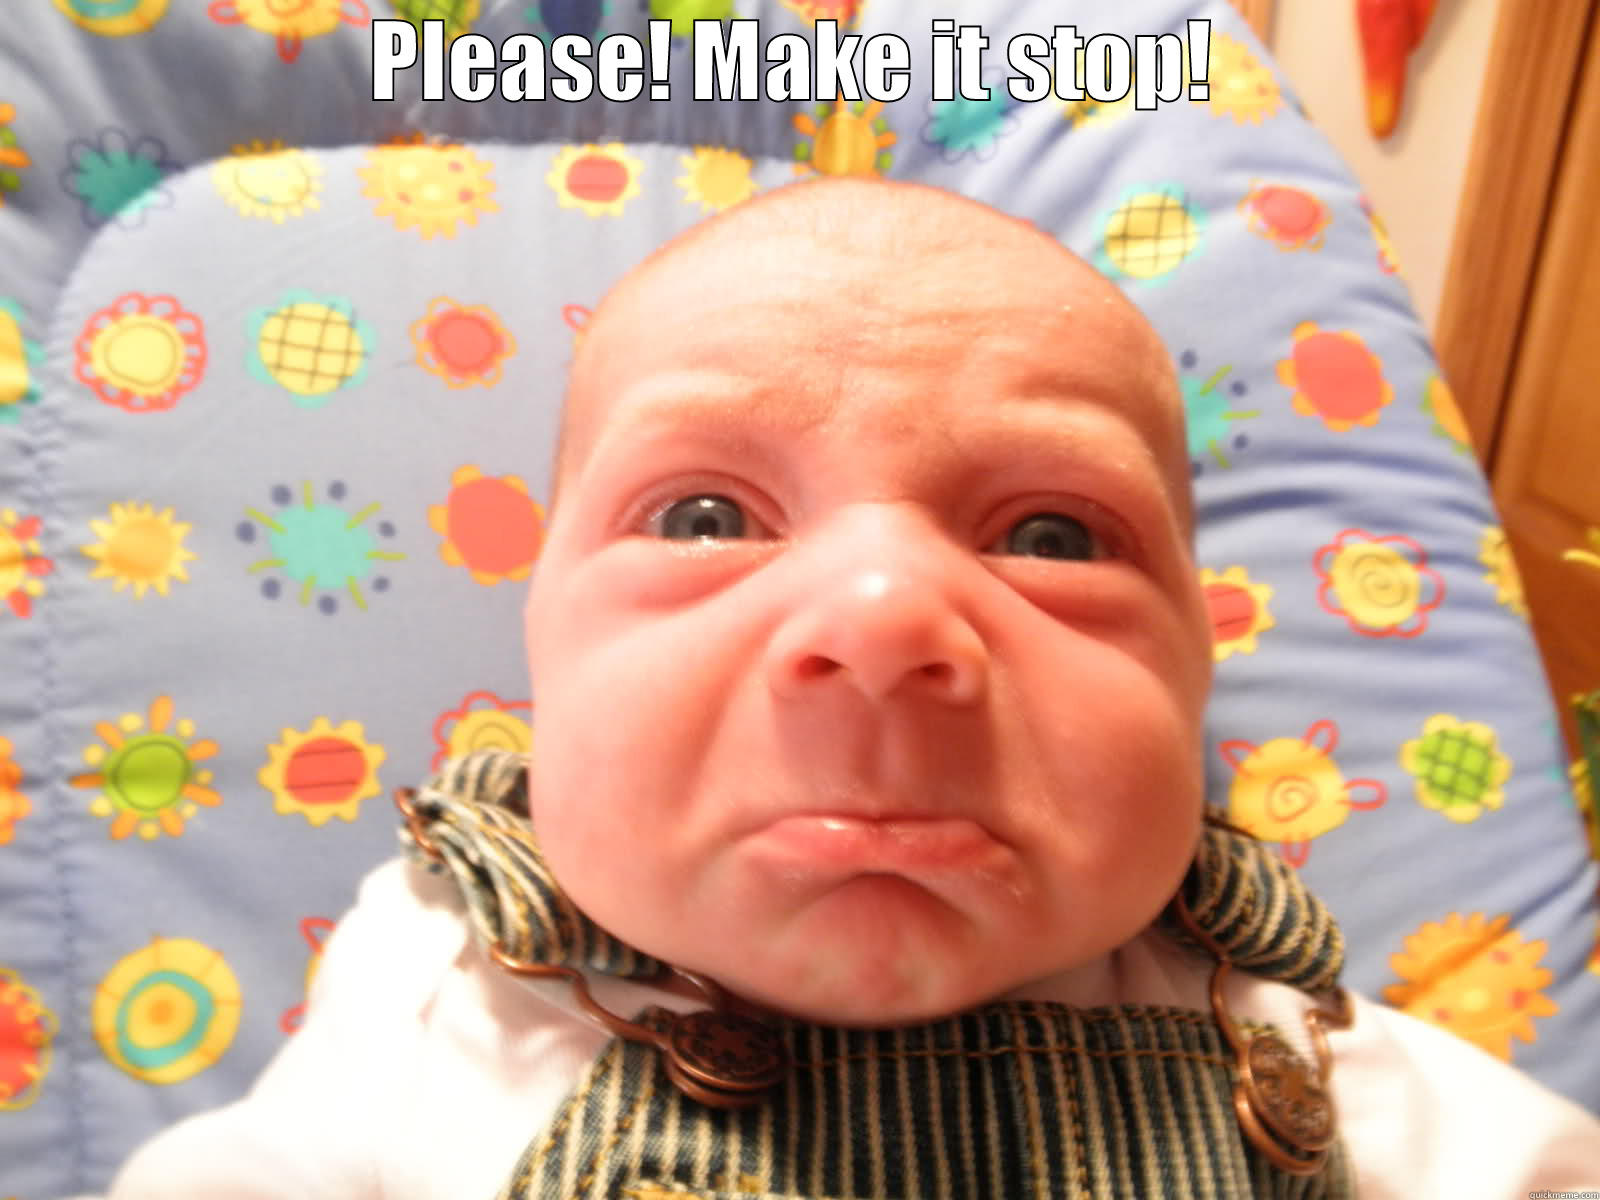 Stressed baby says make it stop - PLEASE! MAKE IT STOP!  Misc